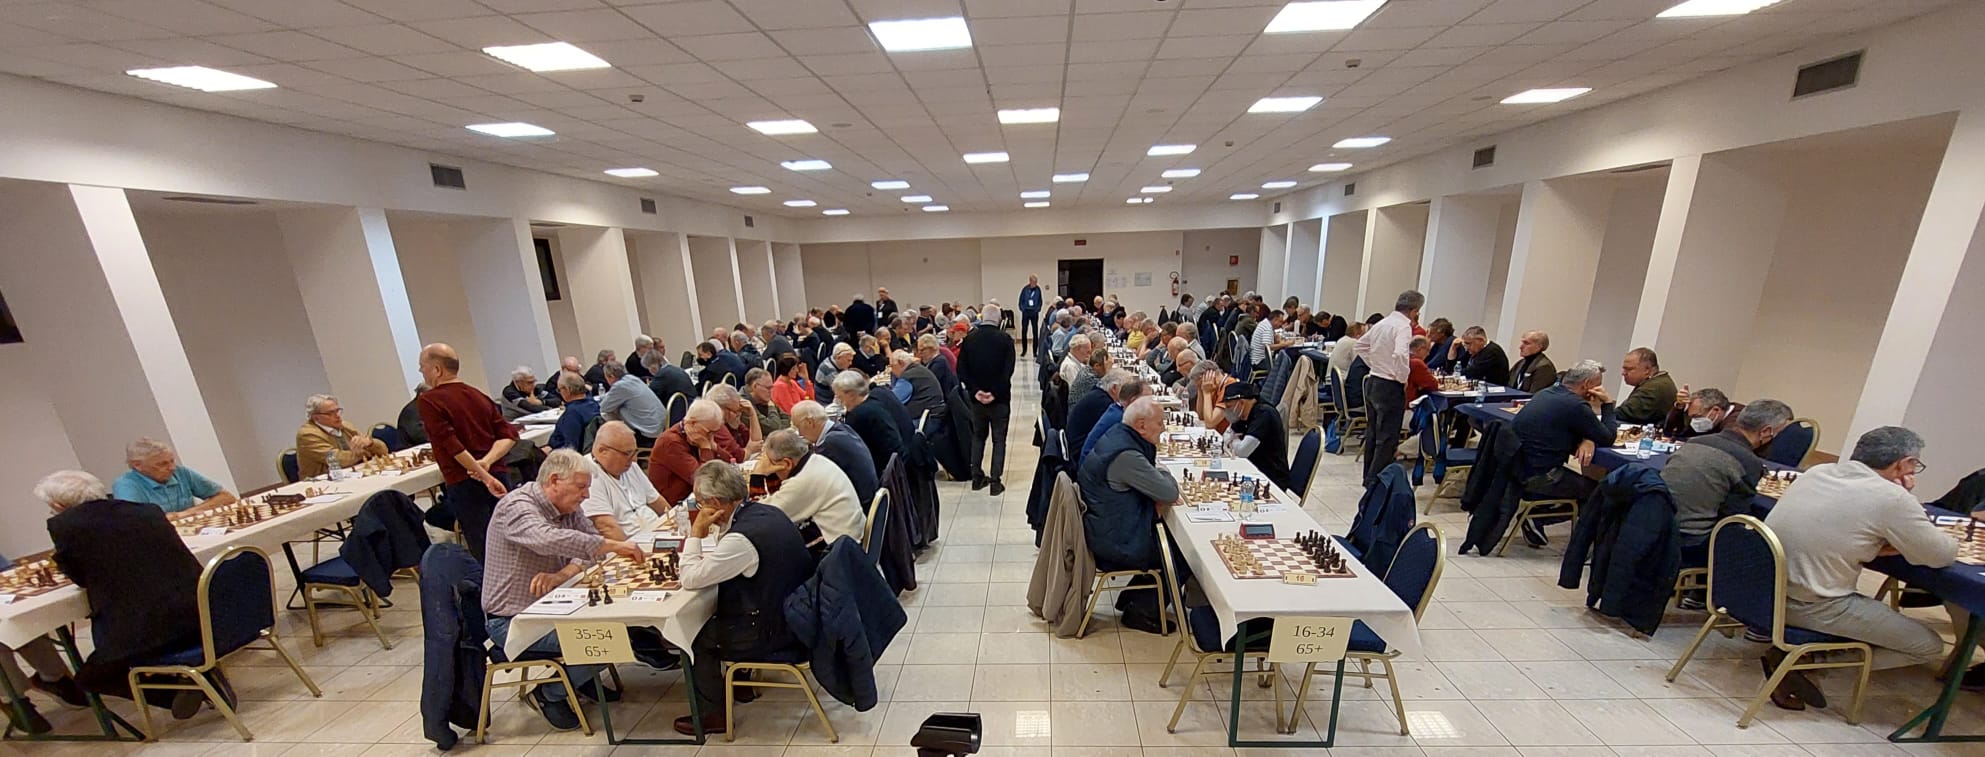 The playing hall at the 30th FIDE World Senior Chess Championship.